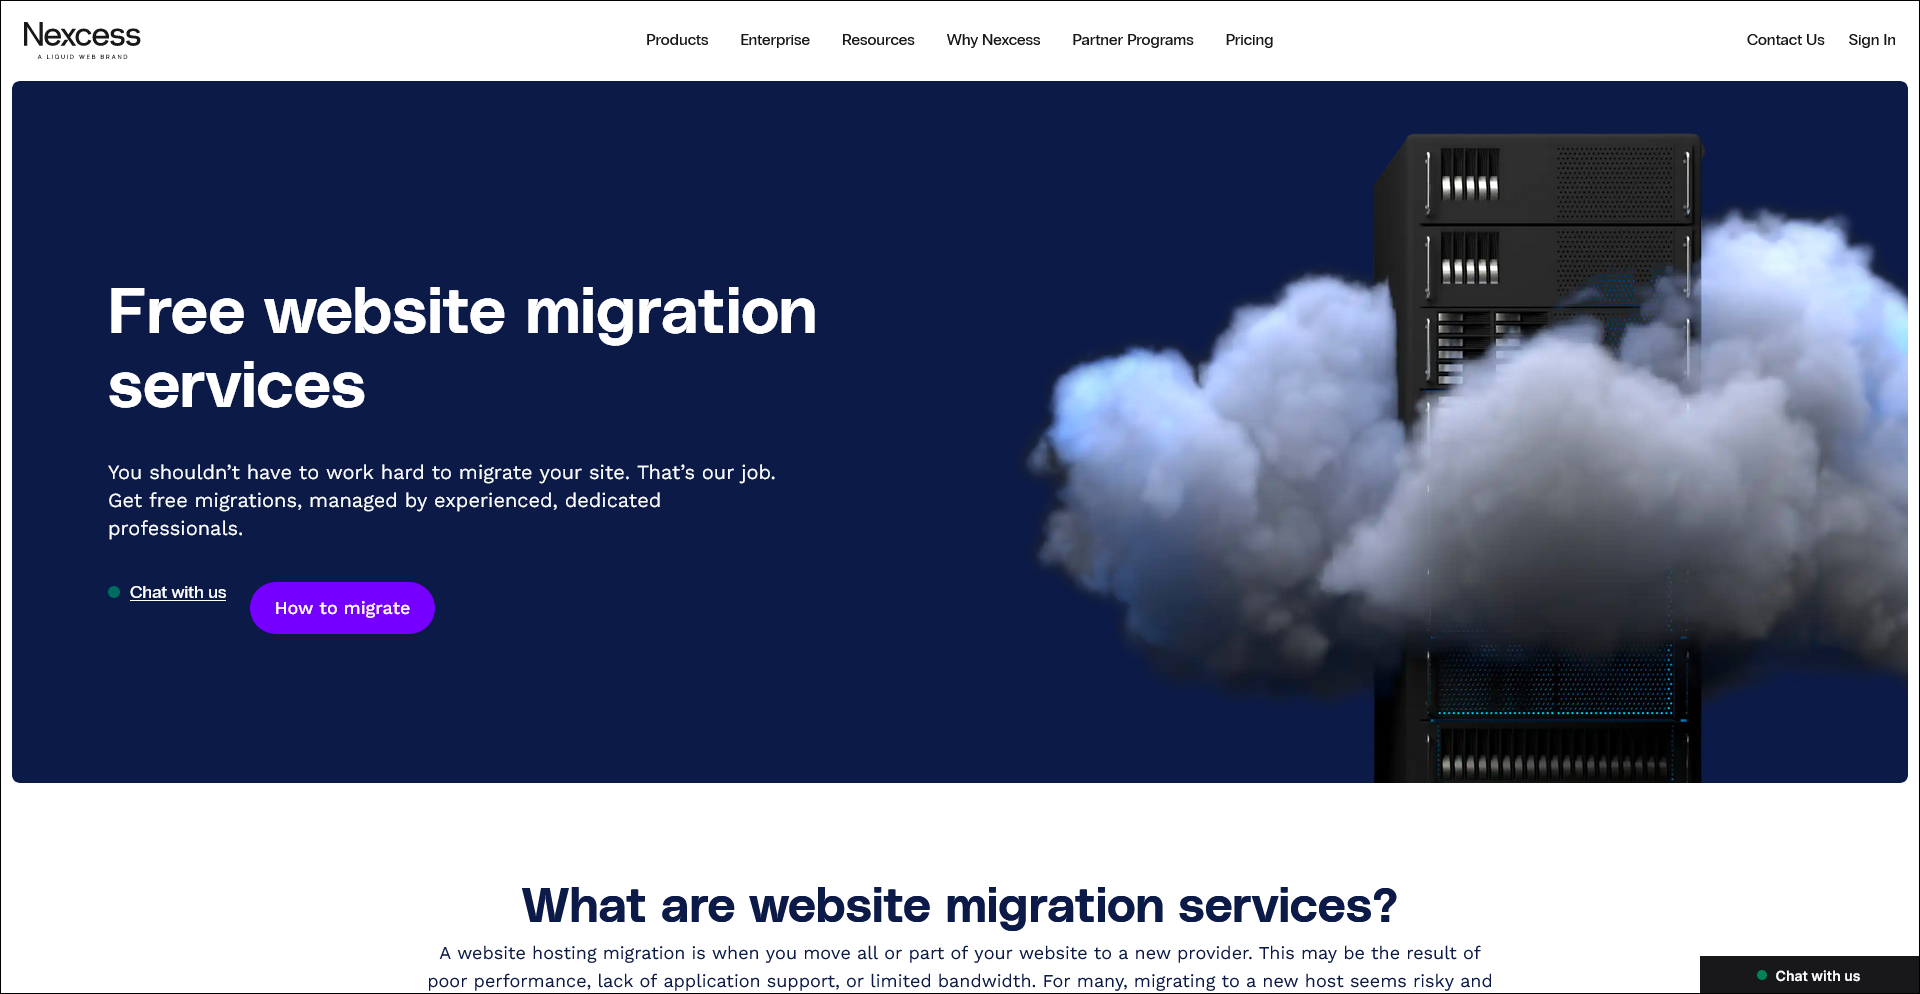 Nexcess offers free website migration services.